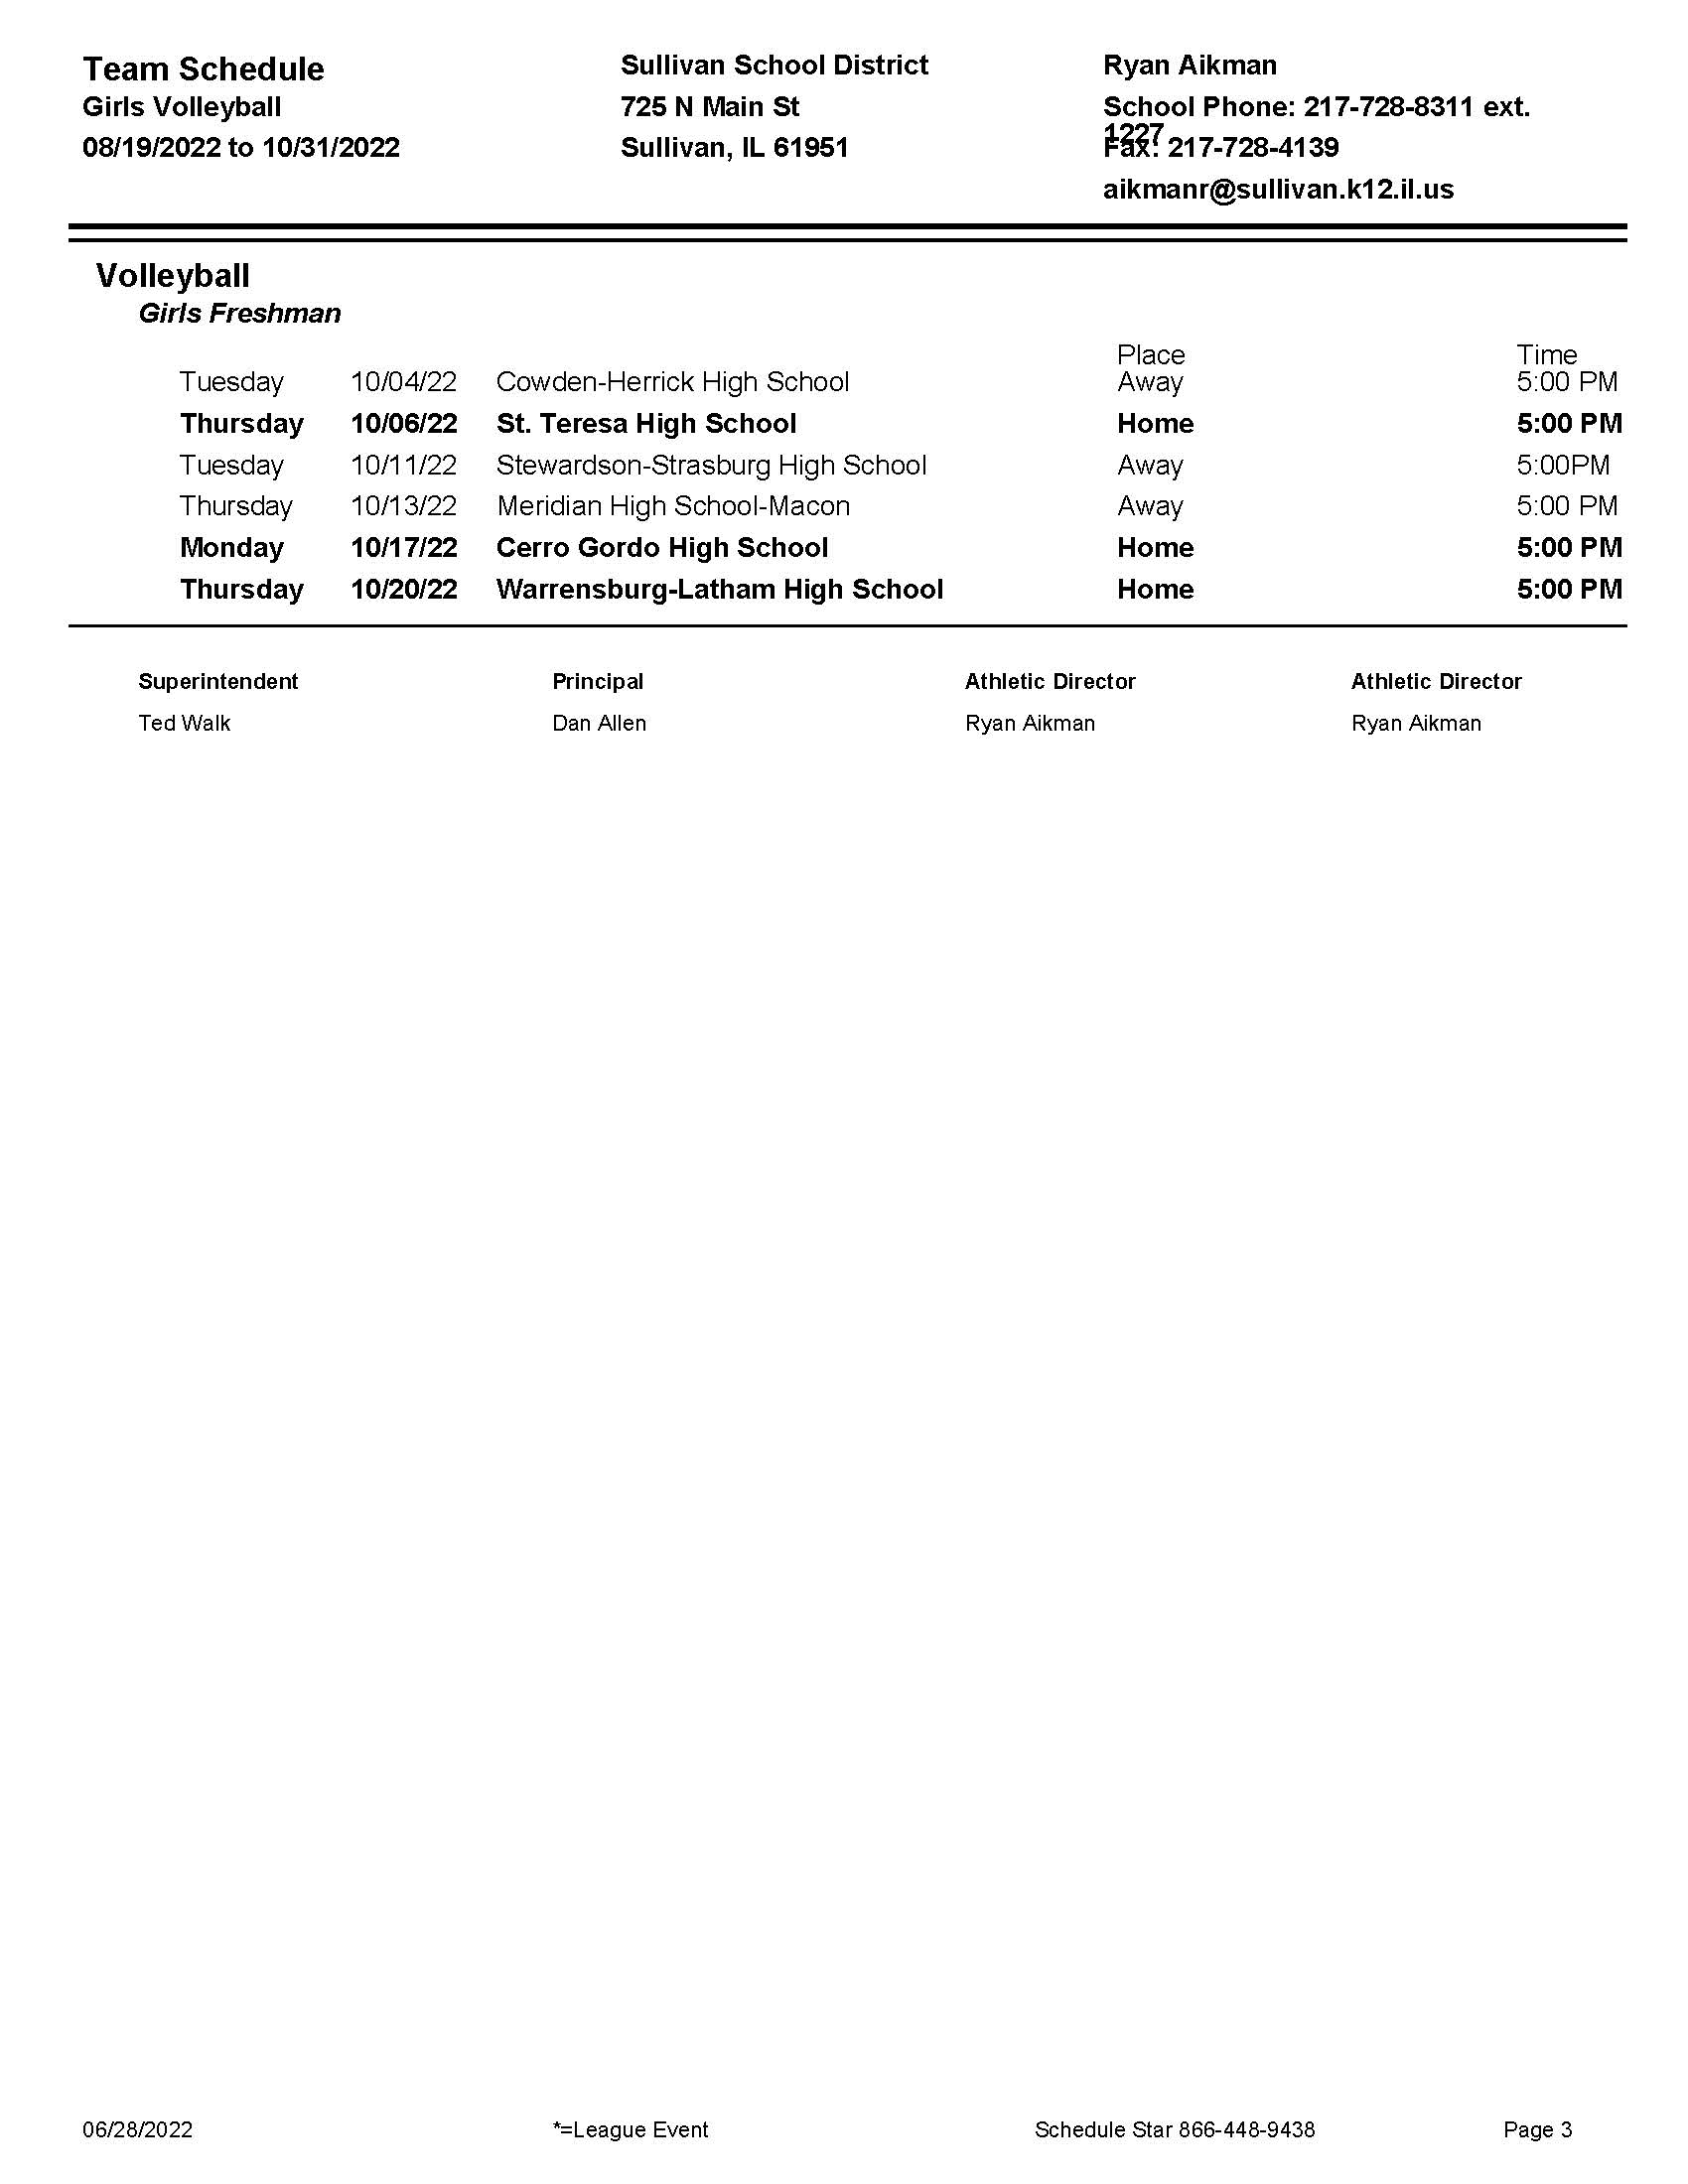 Schedule for VB